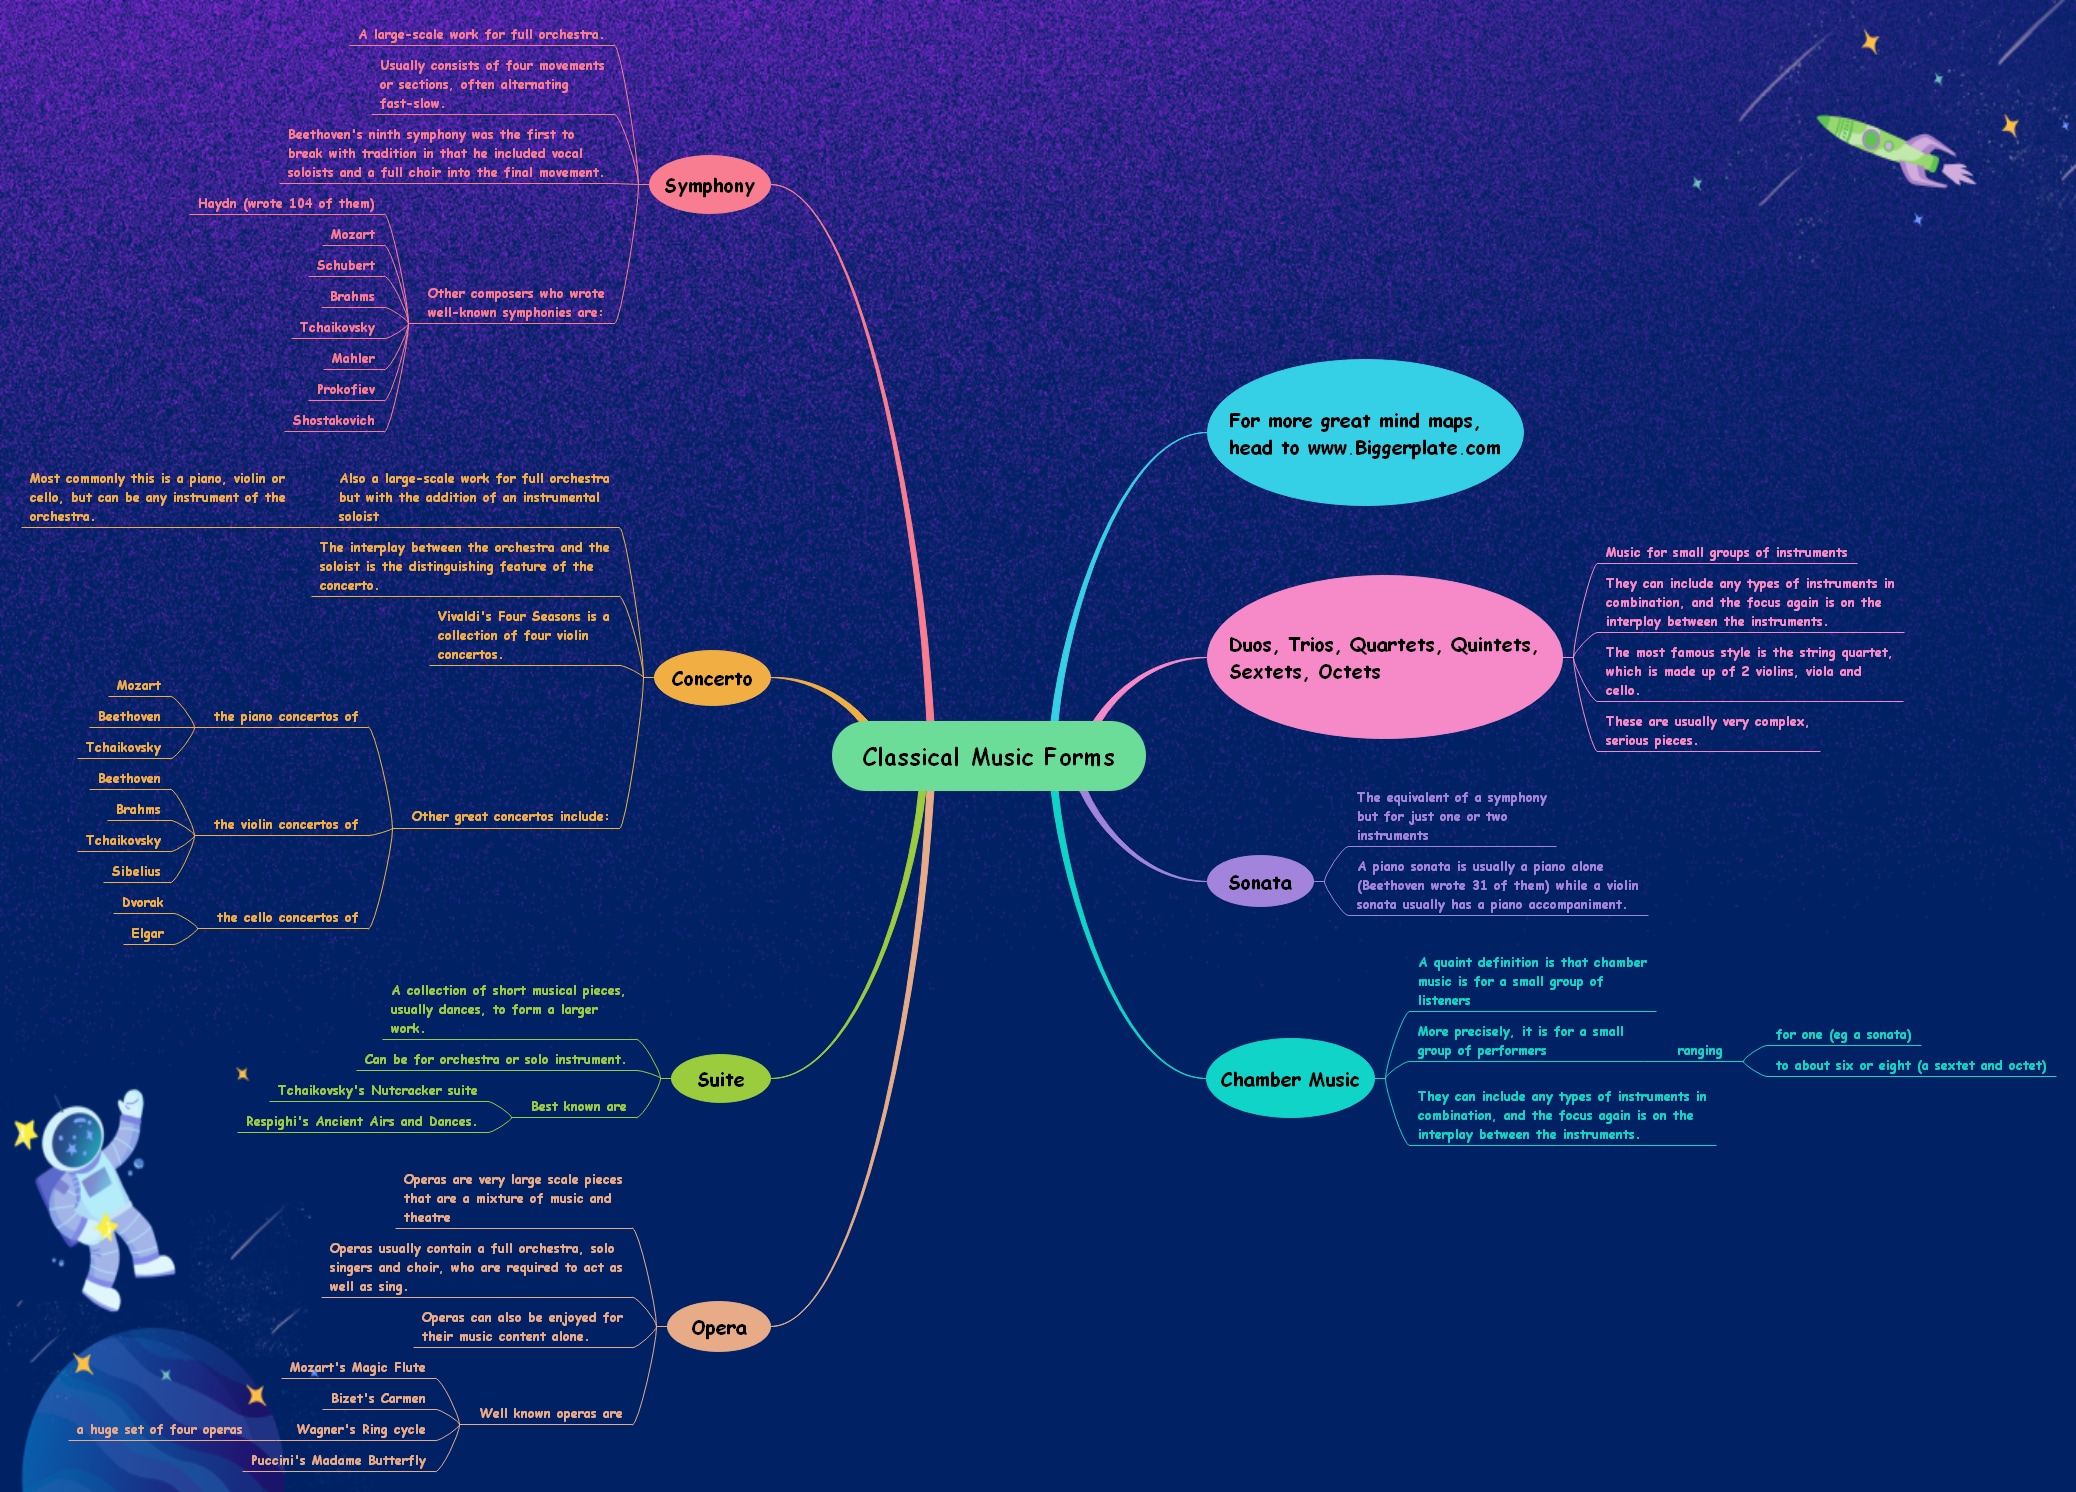 Mind Map Examples